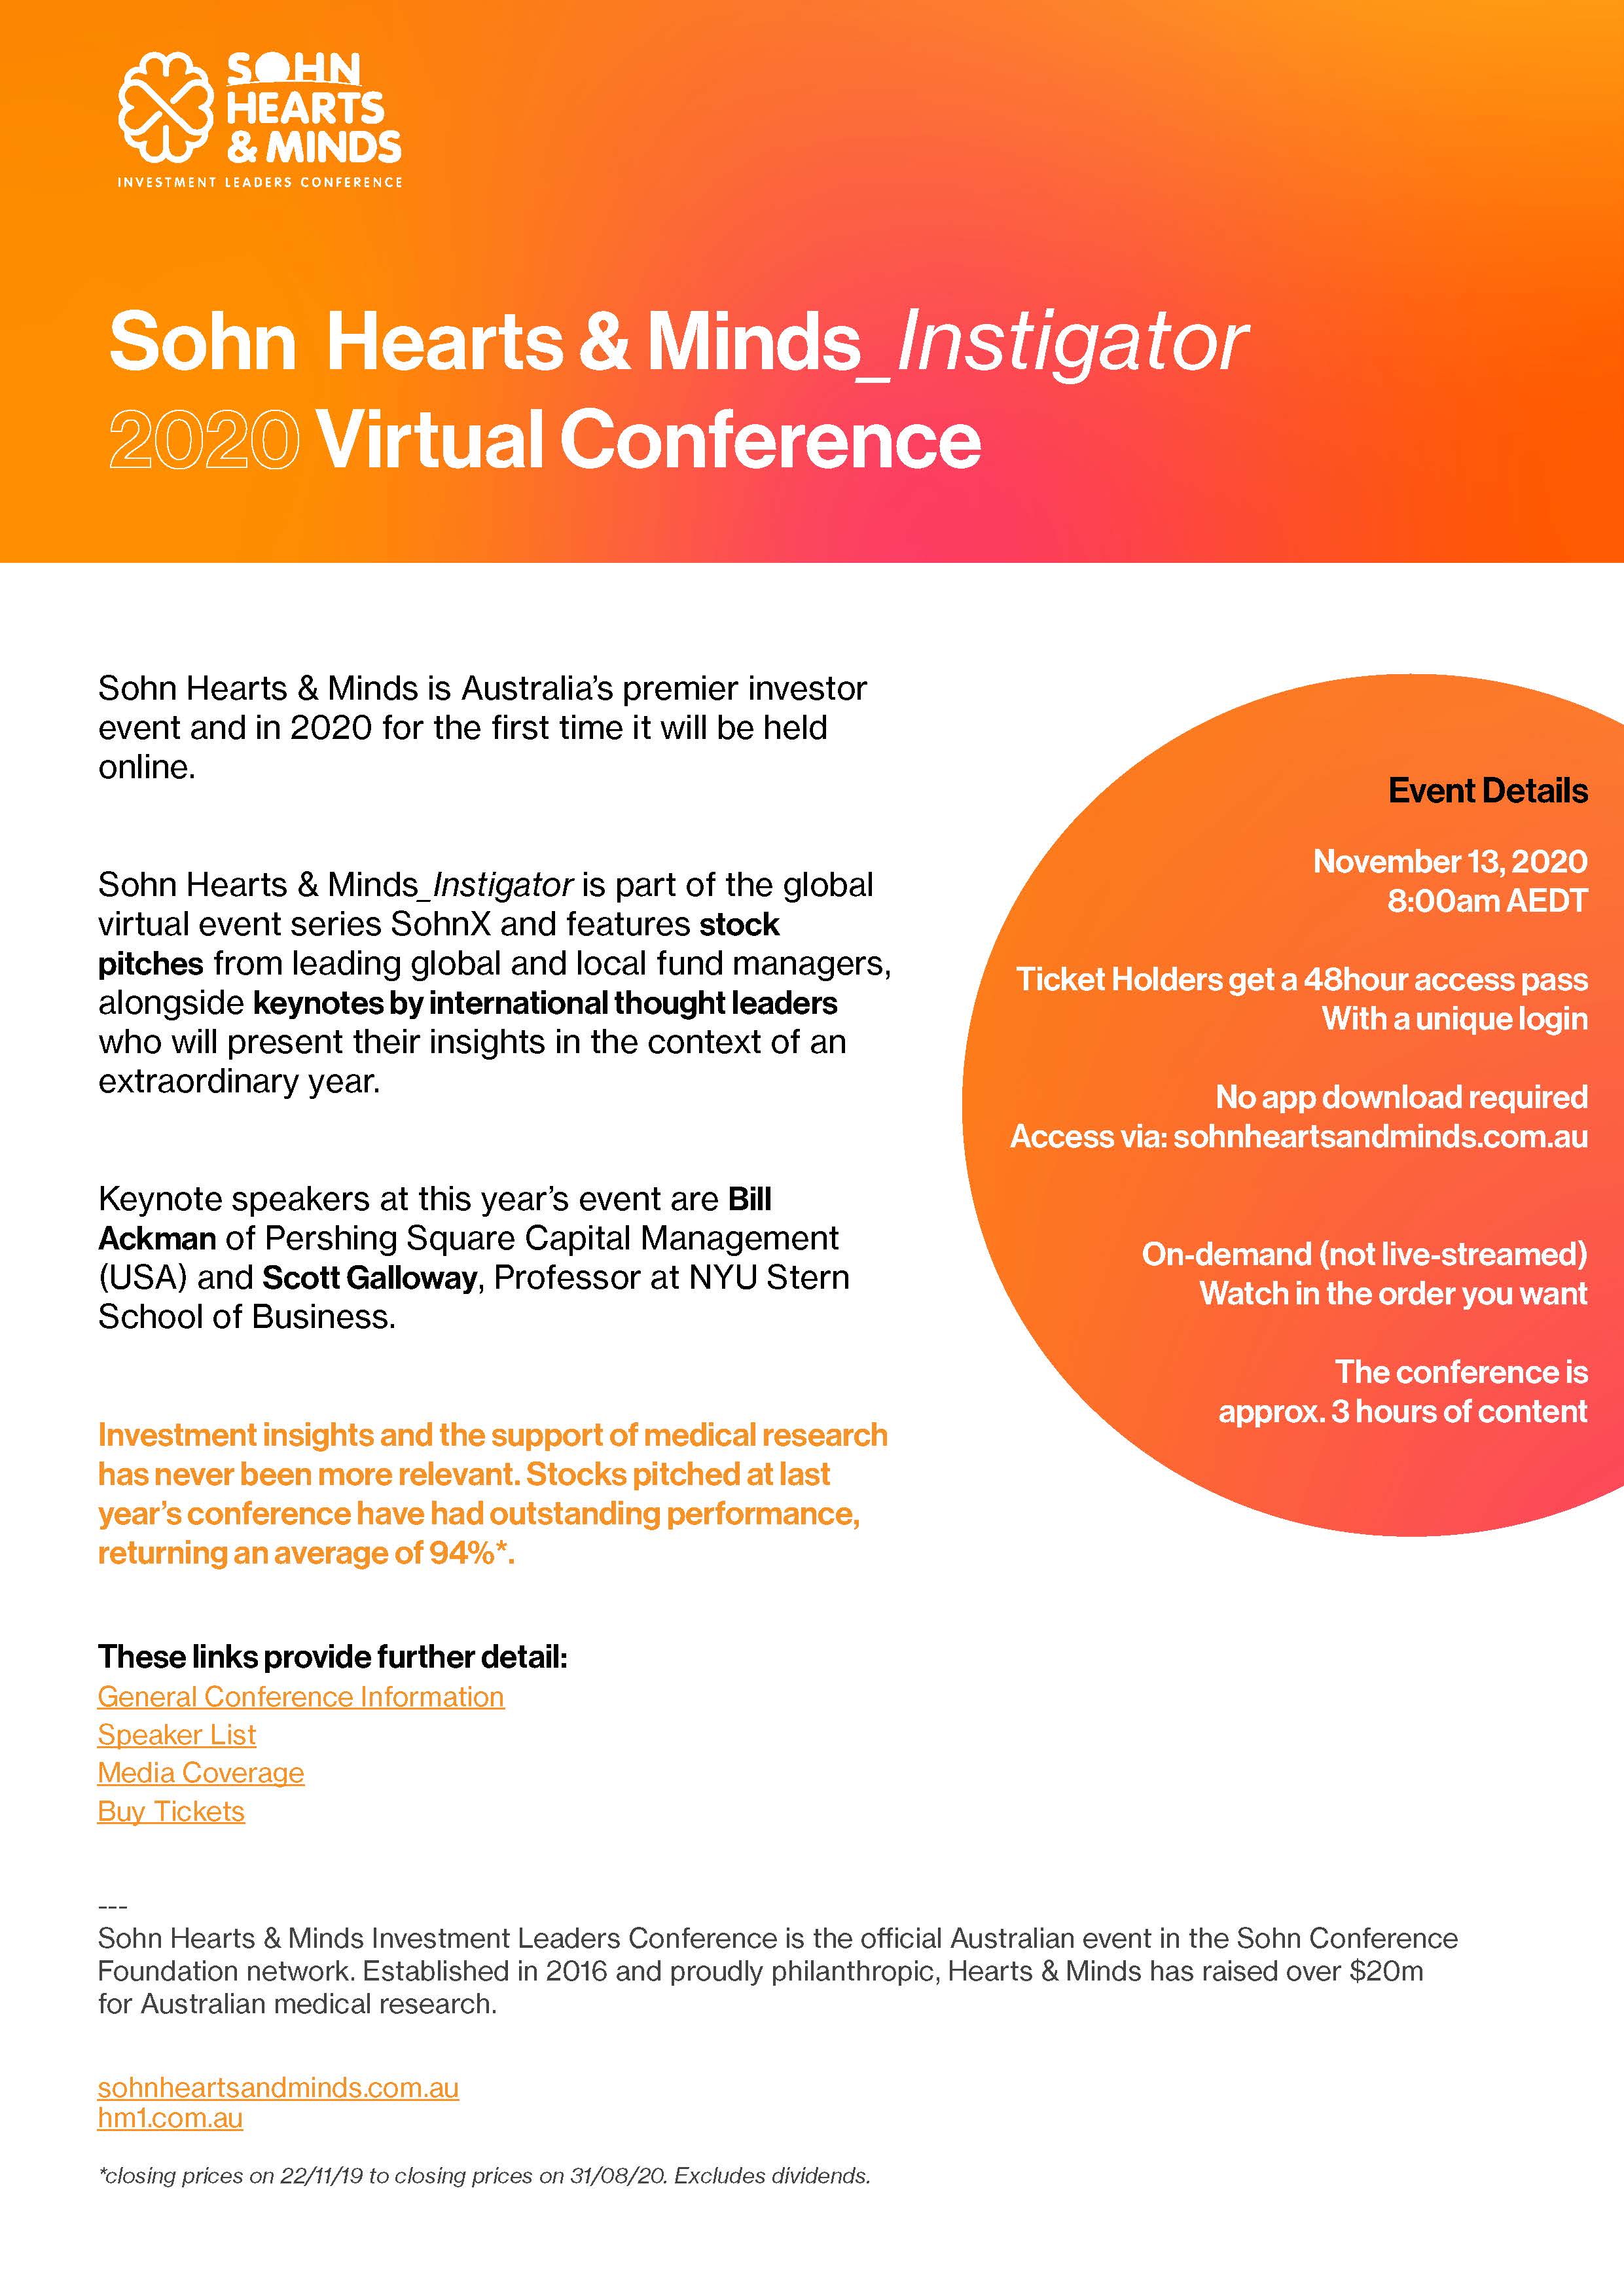 Sohn Hearts and Minds 2020 Virtual Conference